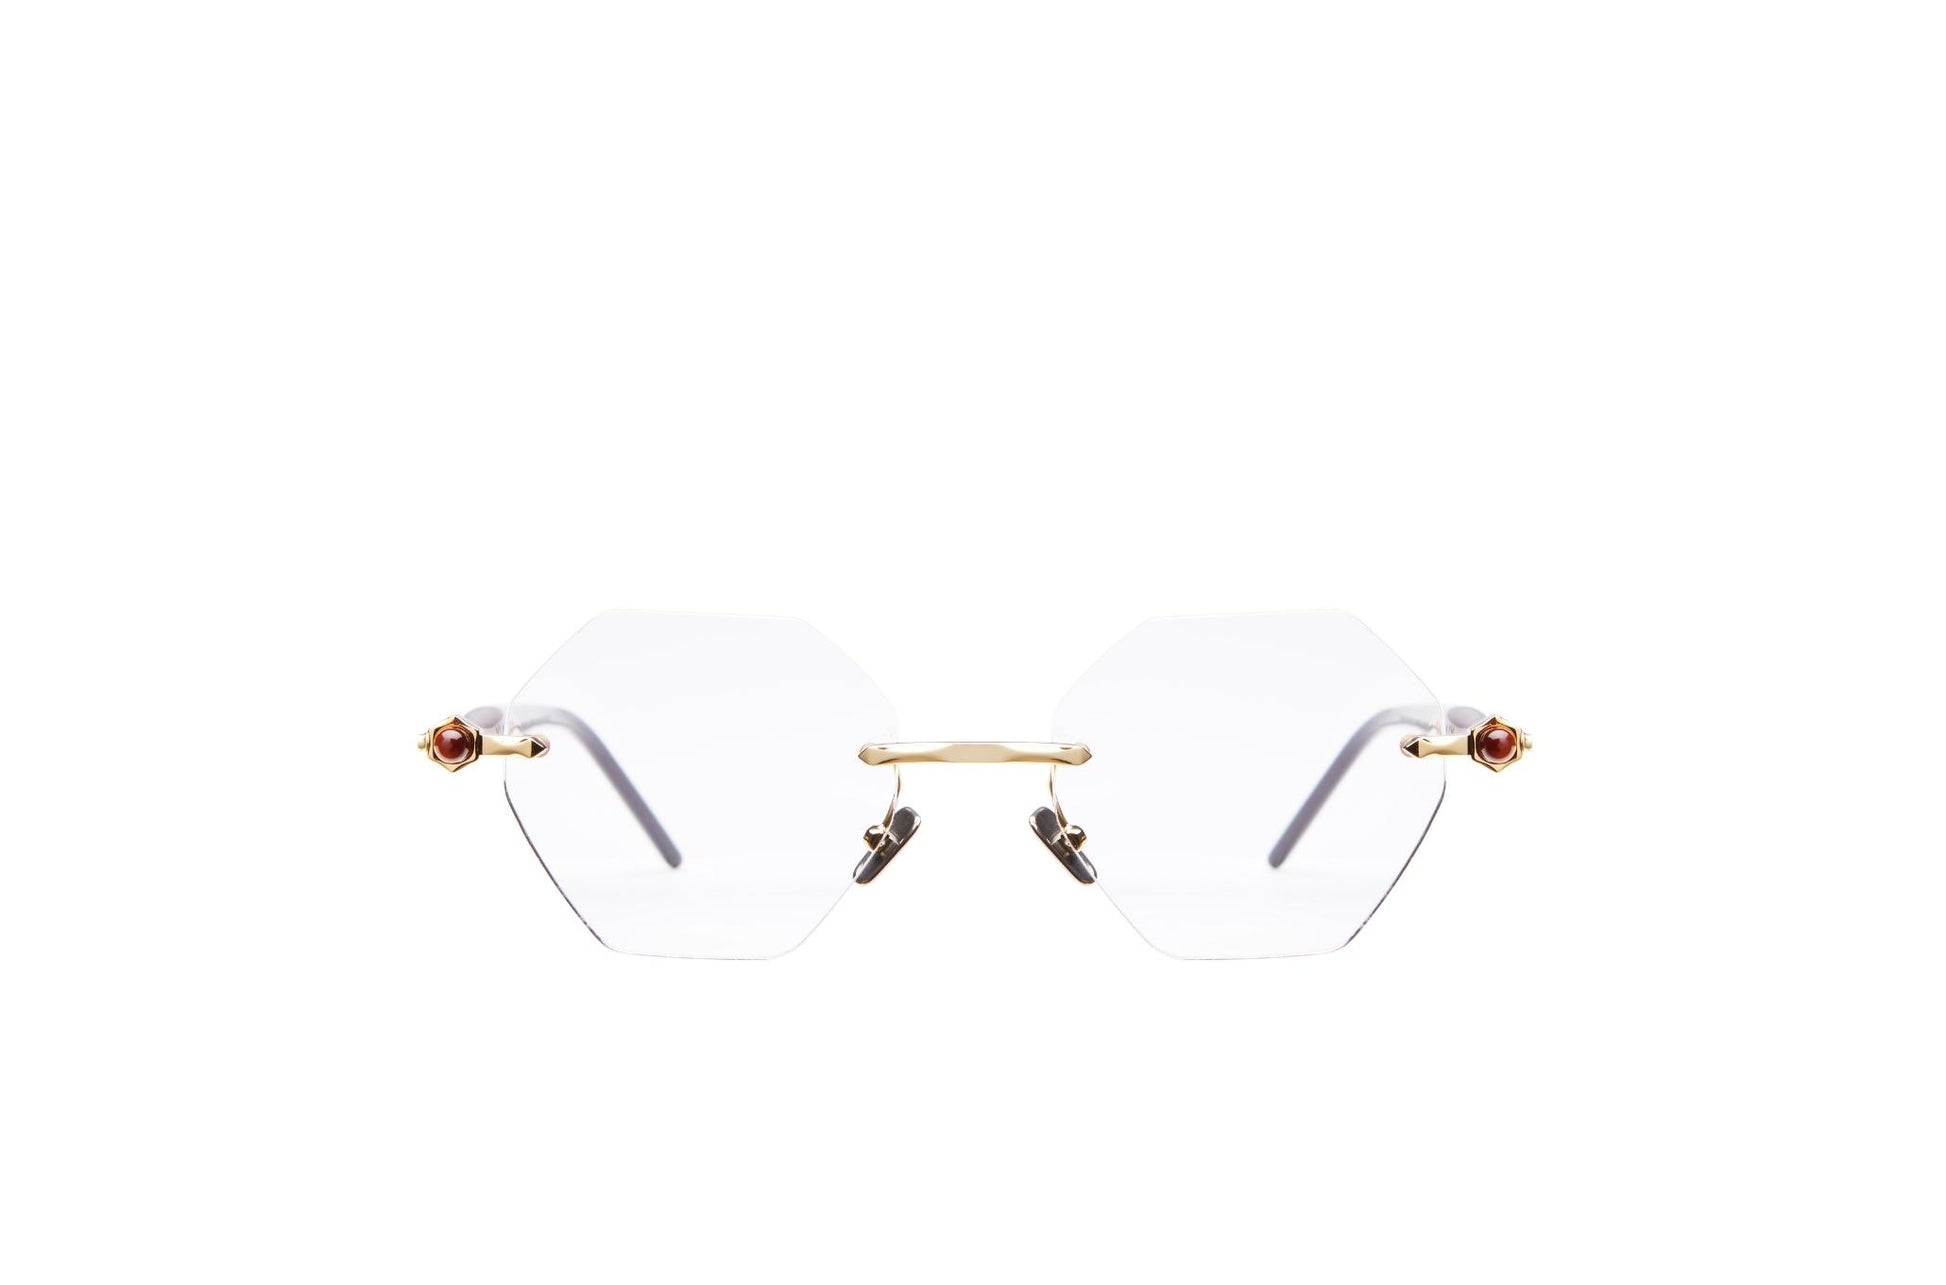 <p>Kuboraum  MASKE P54 is a  Gold; Metal, Acetate rimless Optical  Frame with a  shape.  </p><p>Shop with confidence from Adair Eyewear, a Kuboraum Authorized Dealer.  We have provided the best in customer service and great designer eyewear for over 40 years. Visit https://adaireyewearonline.com</p>